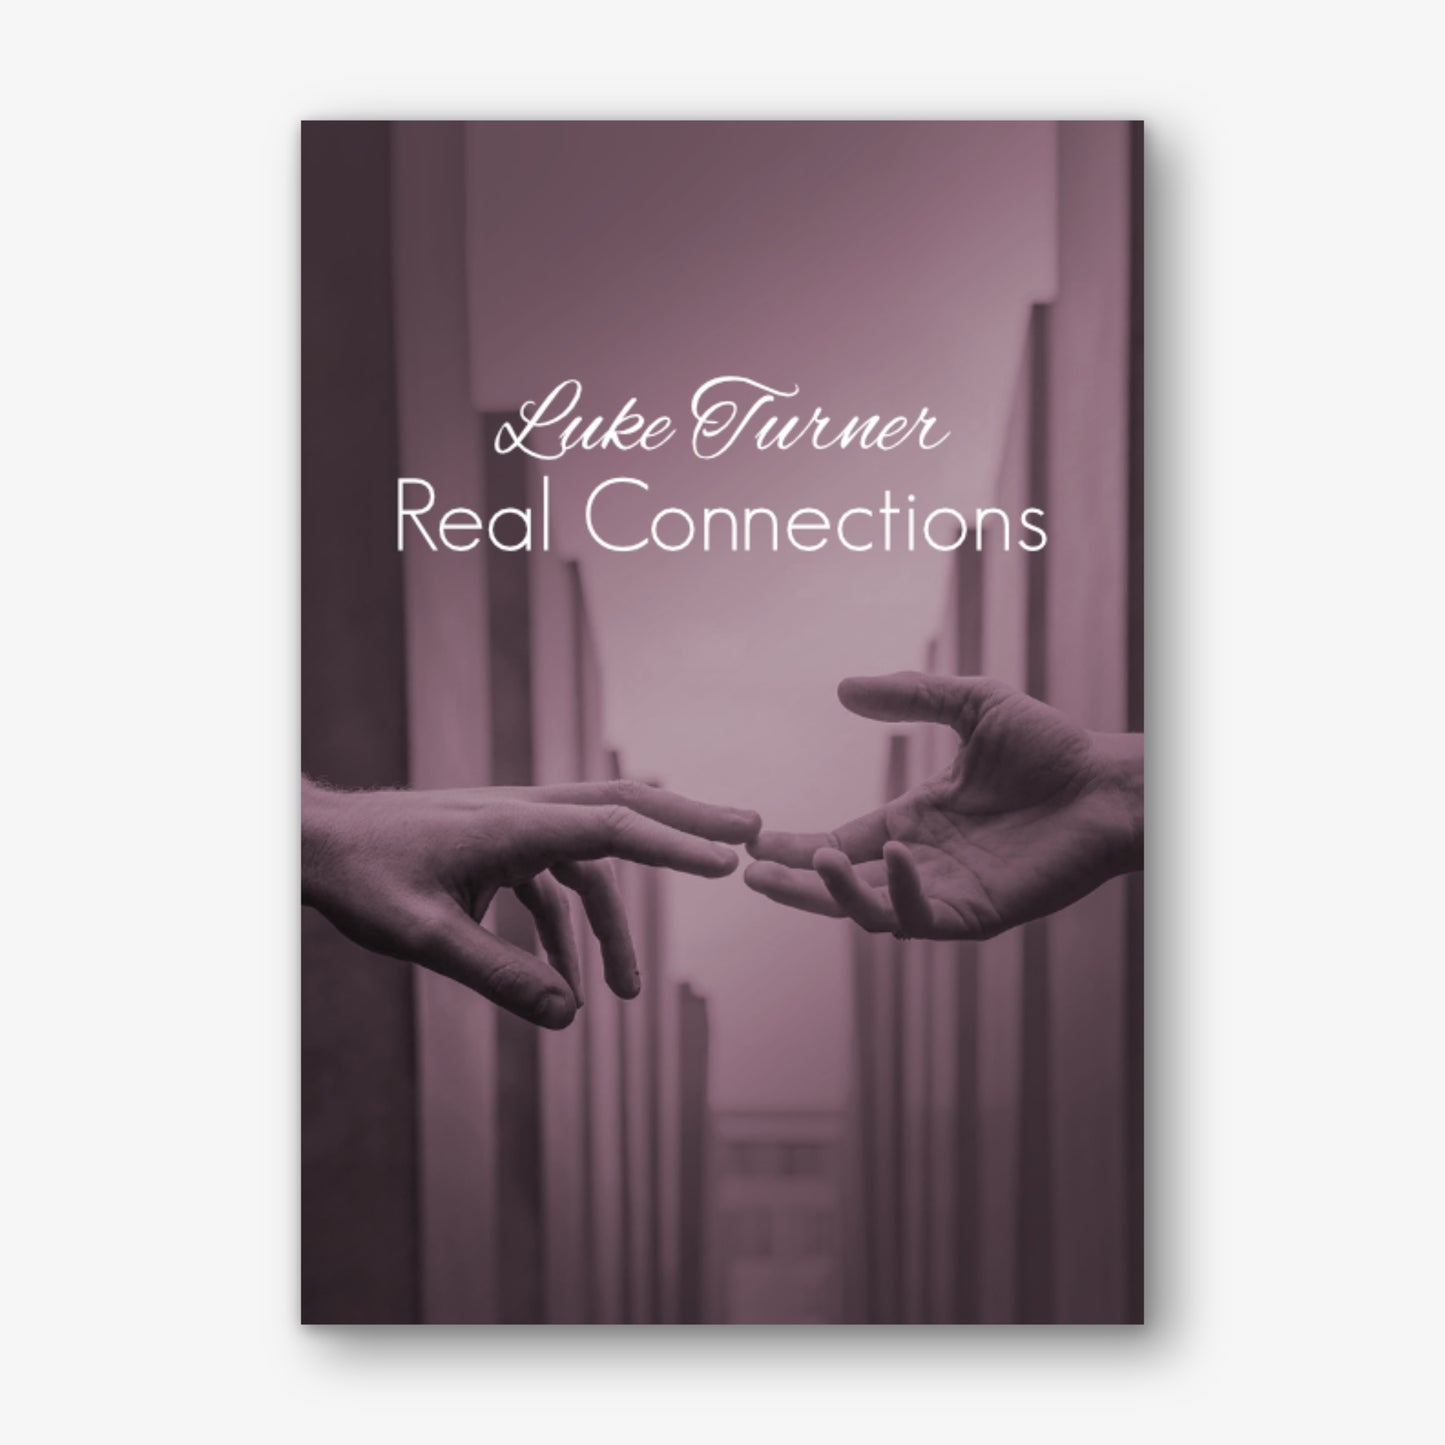 Real Connections by Luke Turner